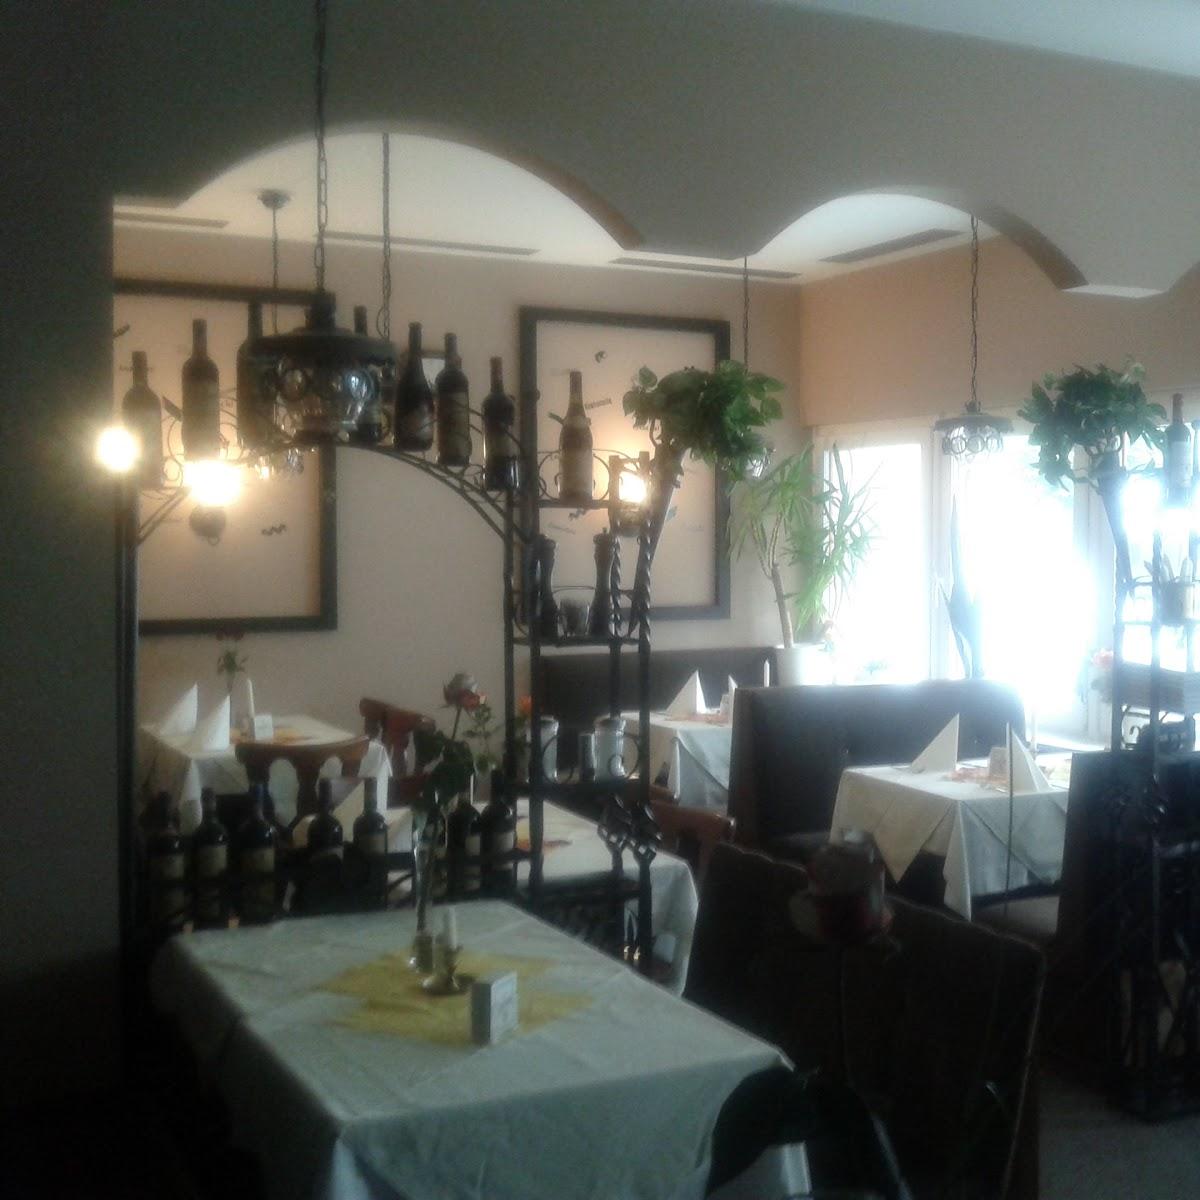 Restaurant "IL Paese" in Berlin